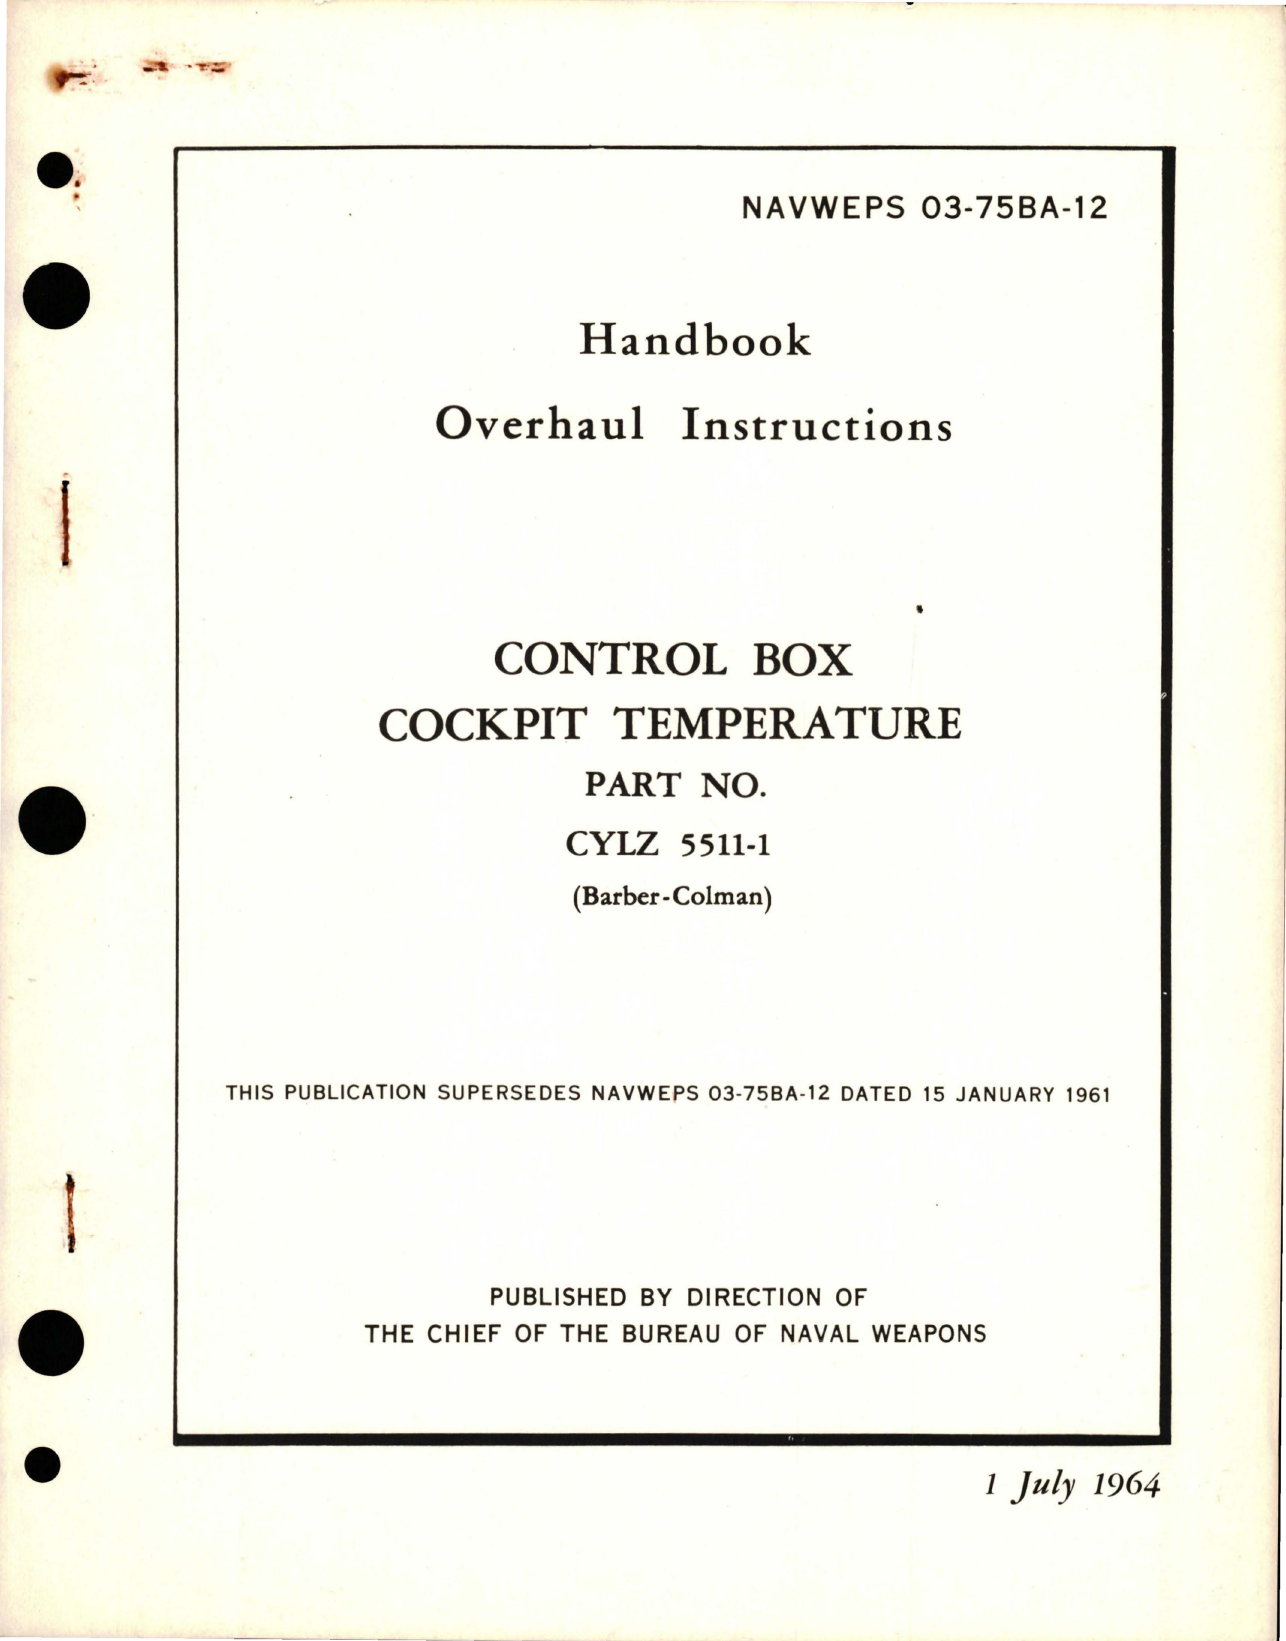 Sample page 1 from AirCorps Library document: Overhaul Instructions for Control Box Cockpit Temperature - Part CYLZ 5511-1 